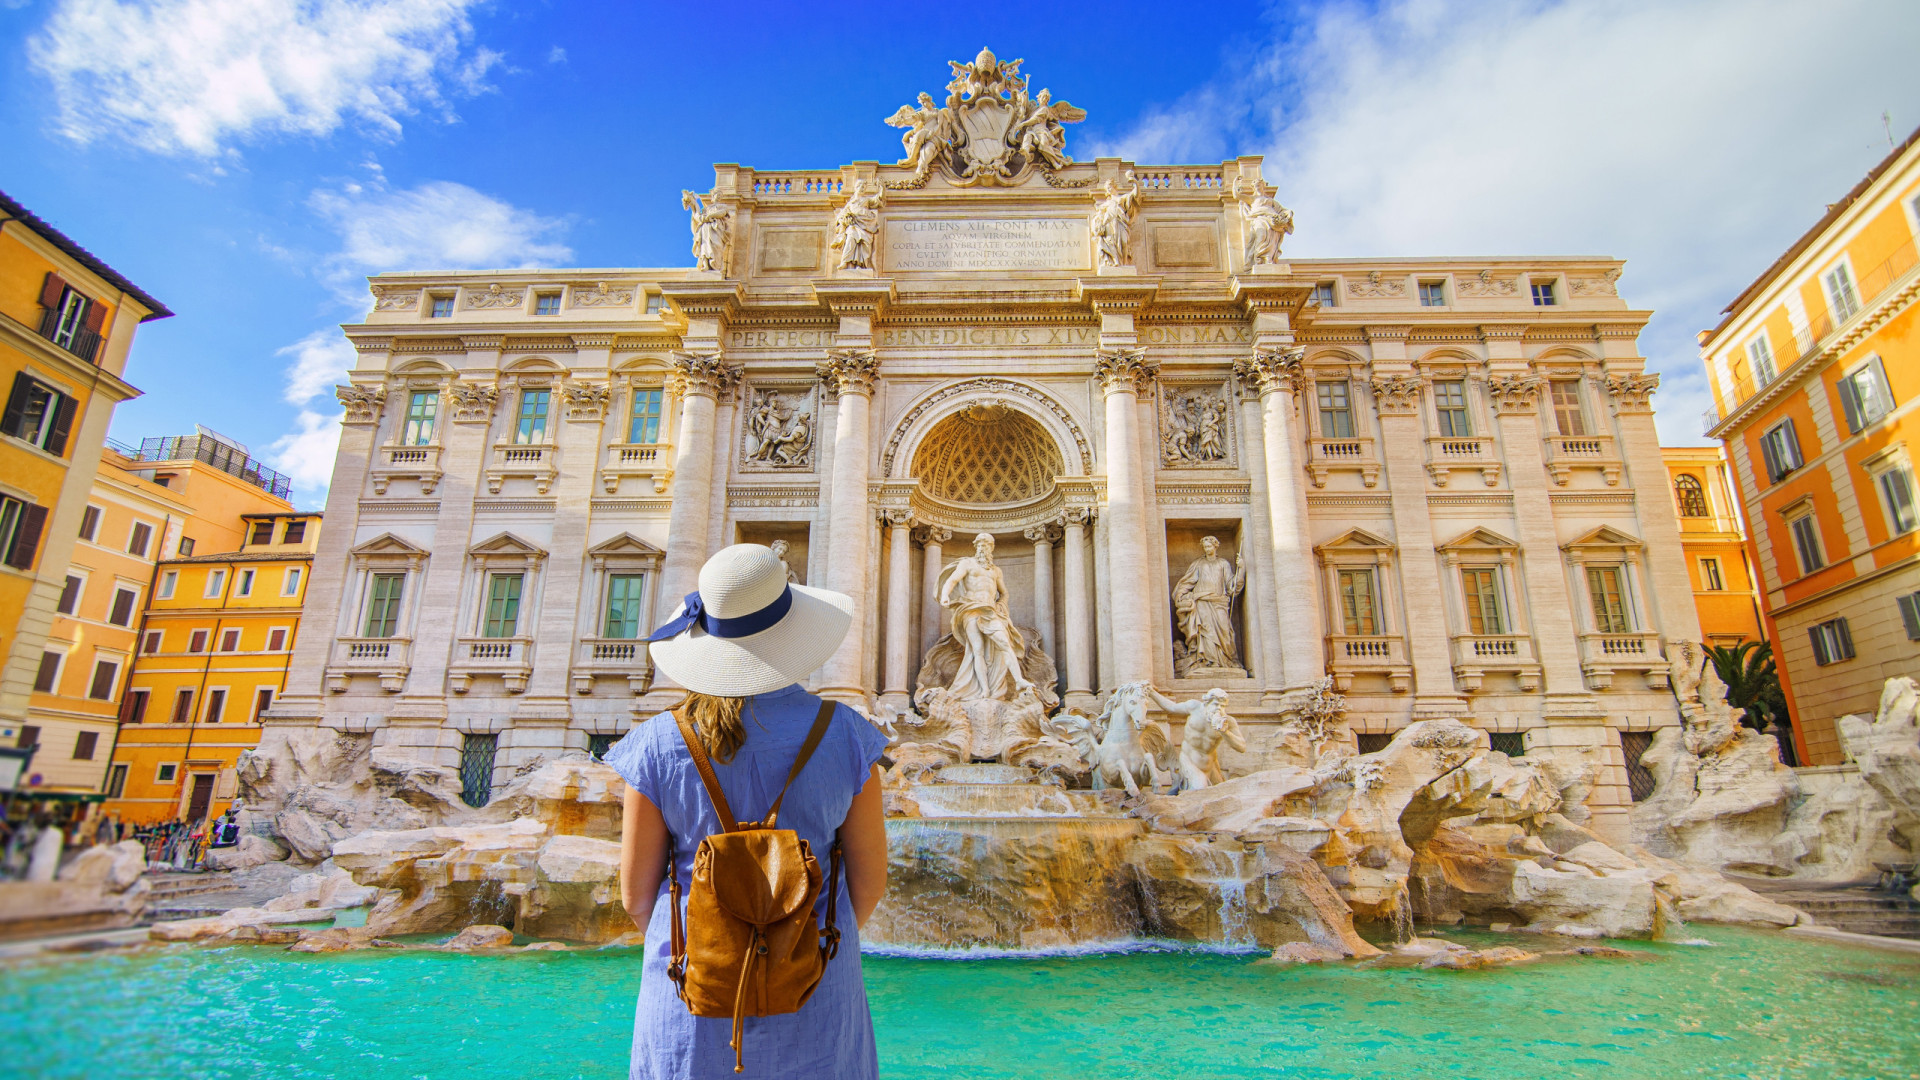 <p>Italy's tourist tax varies depending on your location. Rome's fee ranges from €3 to €7 (US$3.40 to $7.94) a night, depending on the type of room. In 2024, Venice started charging day-trippers €5 ($5.40) during high season.</p><p><a href="https://www.msn.com/en-my/community/channel/vid-7xx8mnucu55yw63we9va2gwr7uihbxwc68fxqp25x6tg4ftibpra?cvid=94631541bc0f4f89bfd59158d696ad7e">Follow us and access great exclusive content every day</a></p>